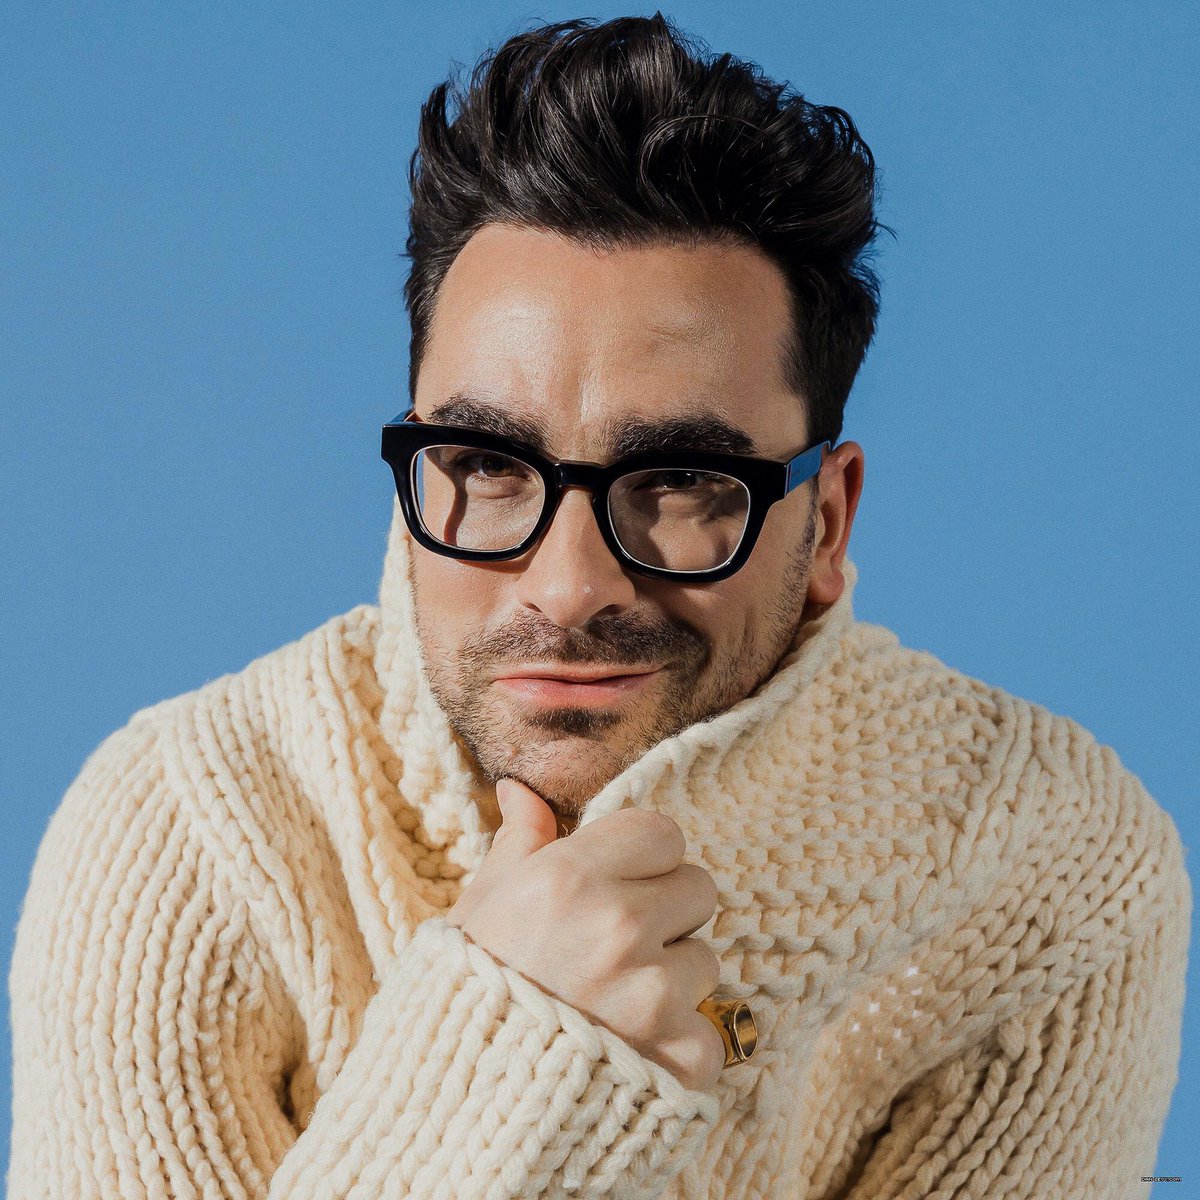 on all levels except physical dan levy is hugging me warmly and comfortingl...